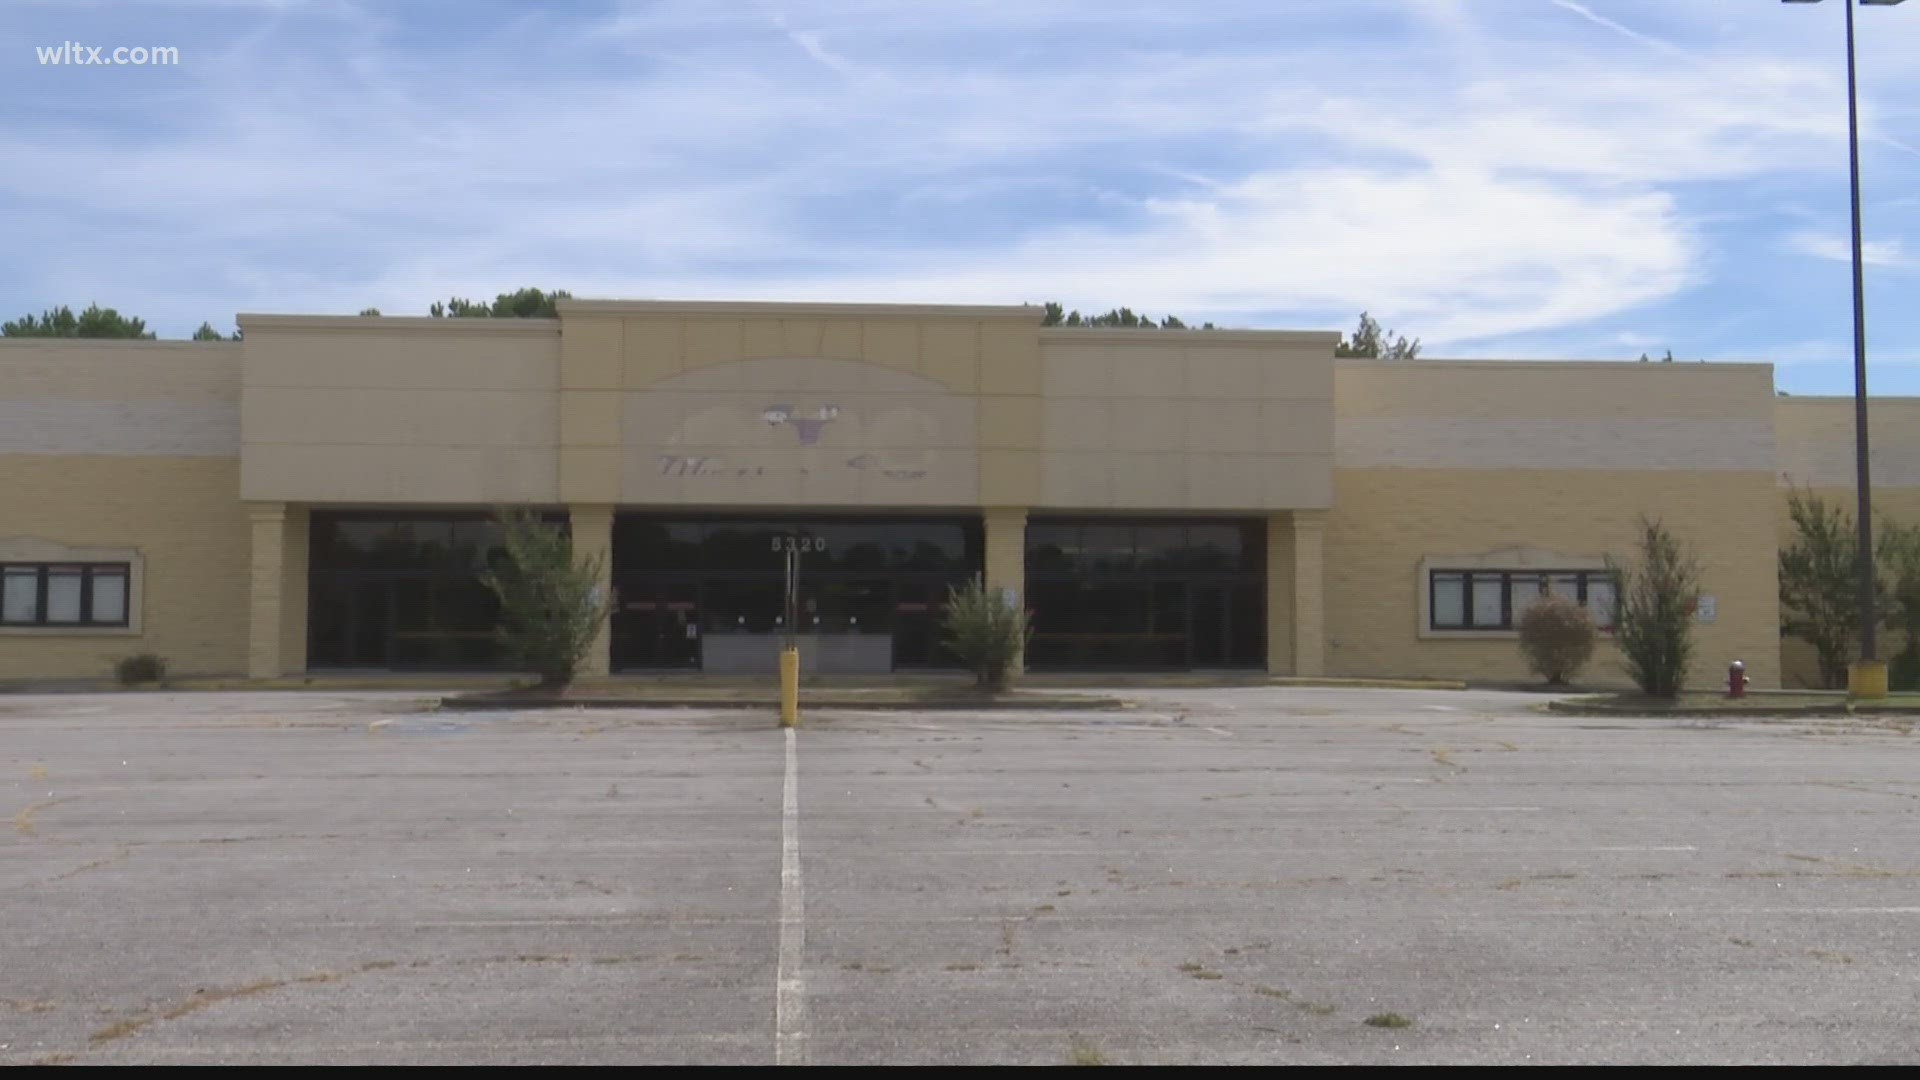 The former AMC movie theater on Forest Drive has been purchased by a church.